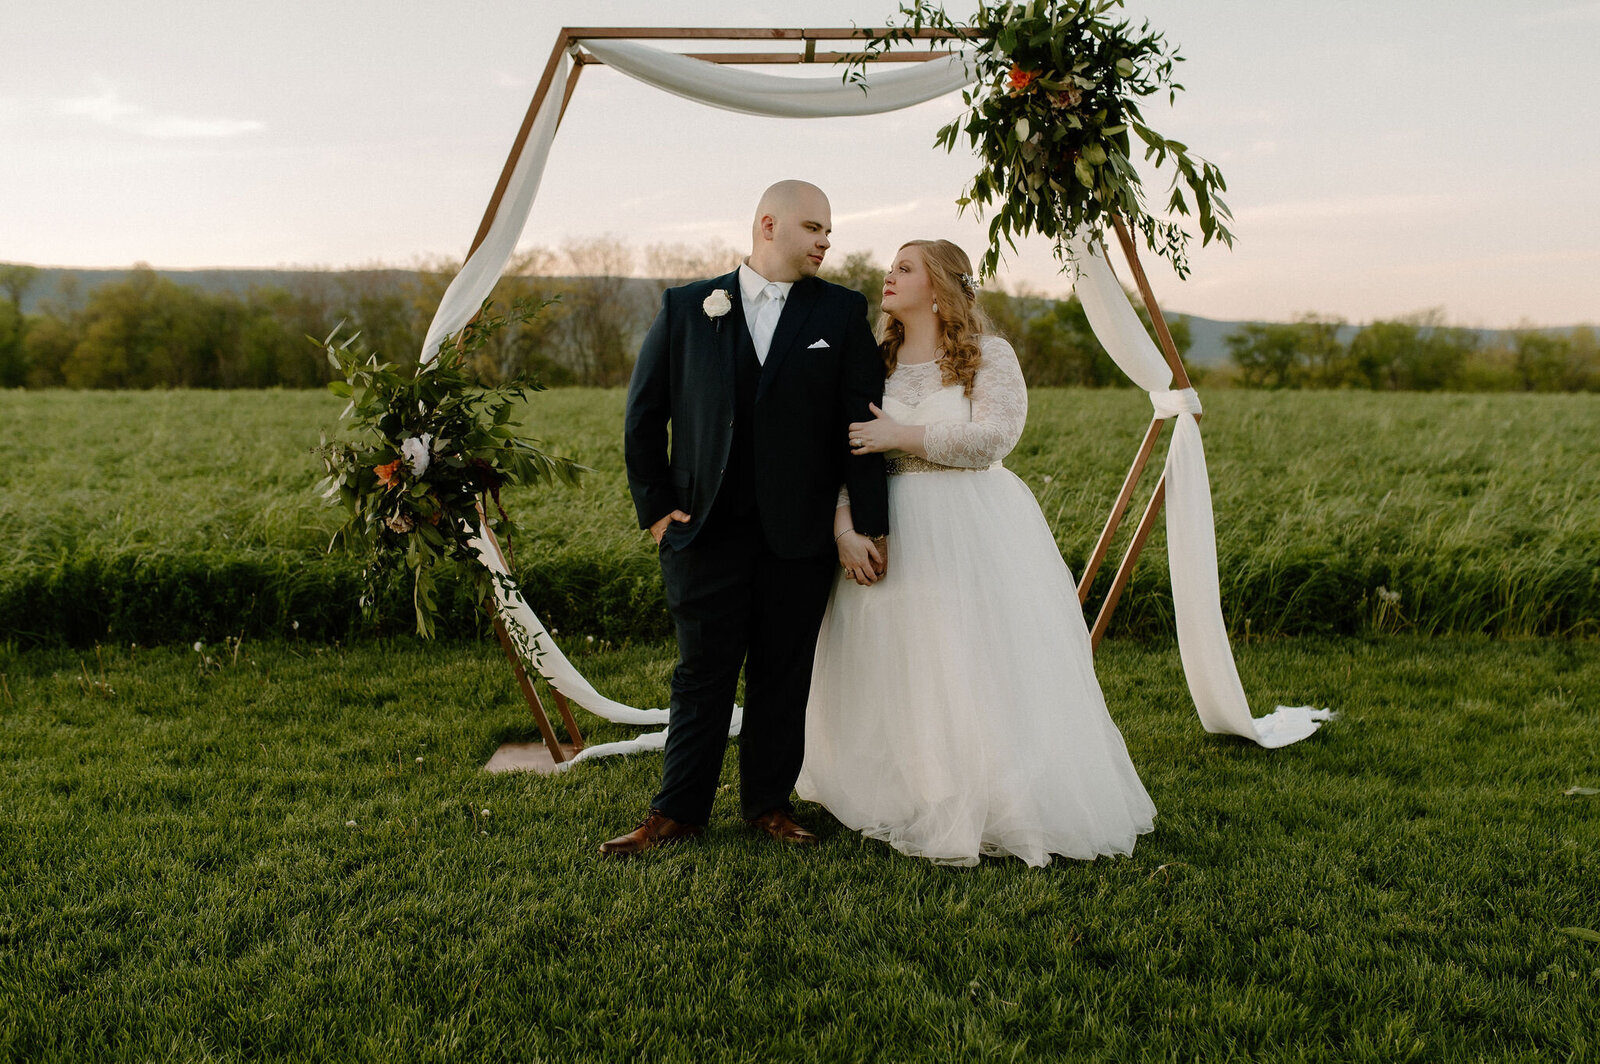 couple standing under hexagon wooden wedding arbor with white fabric, florals, and greenery